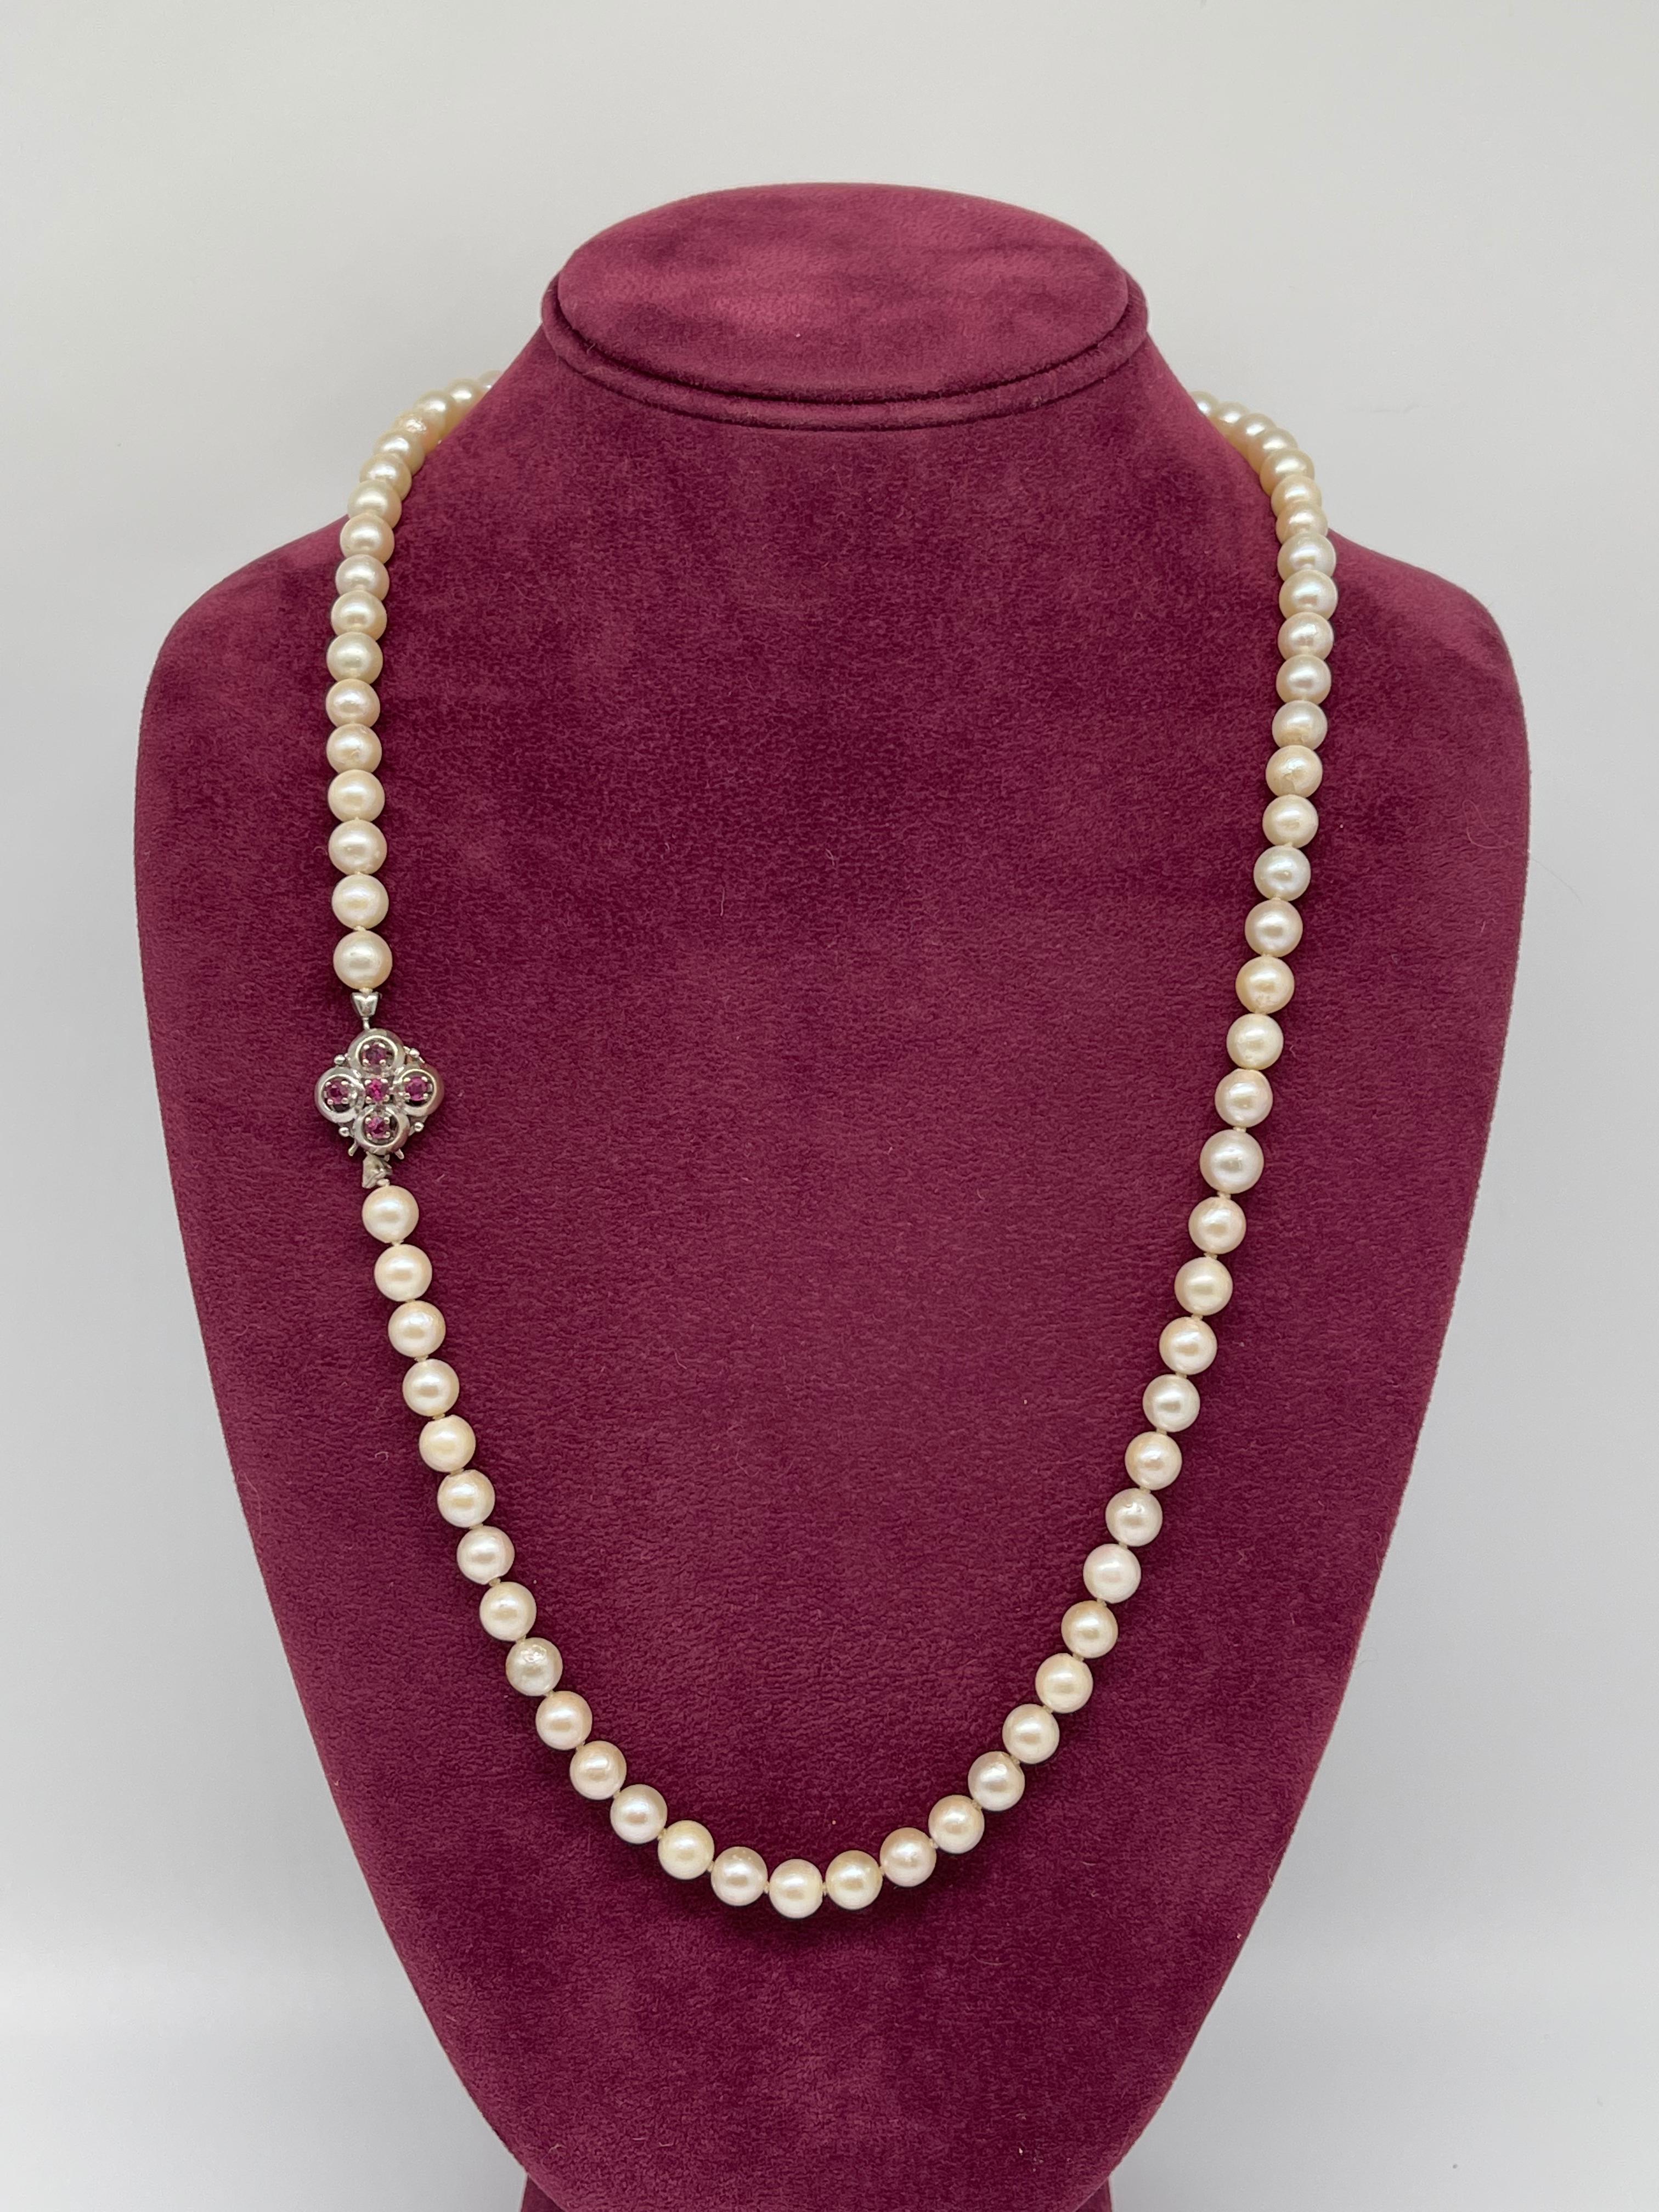 Square Cut Akoya Pearl Necklace with 14 kt. White Gold and Ruby Clasp For Sale